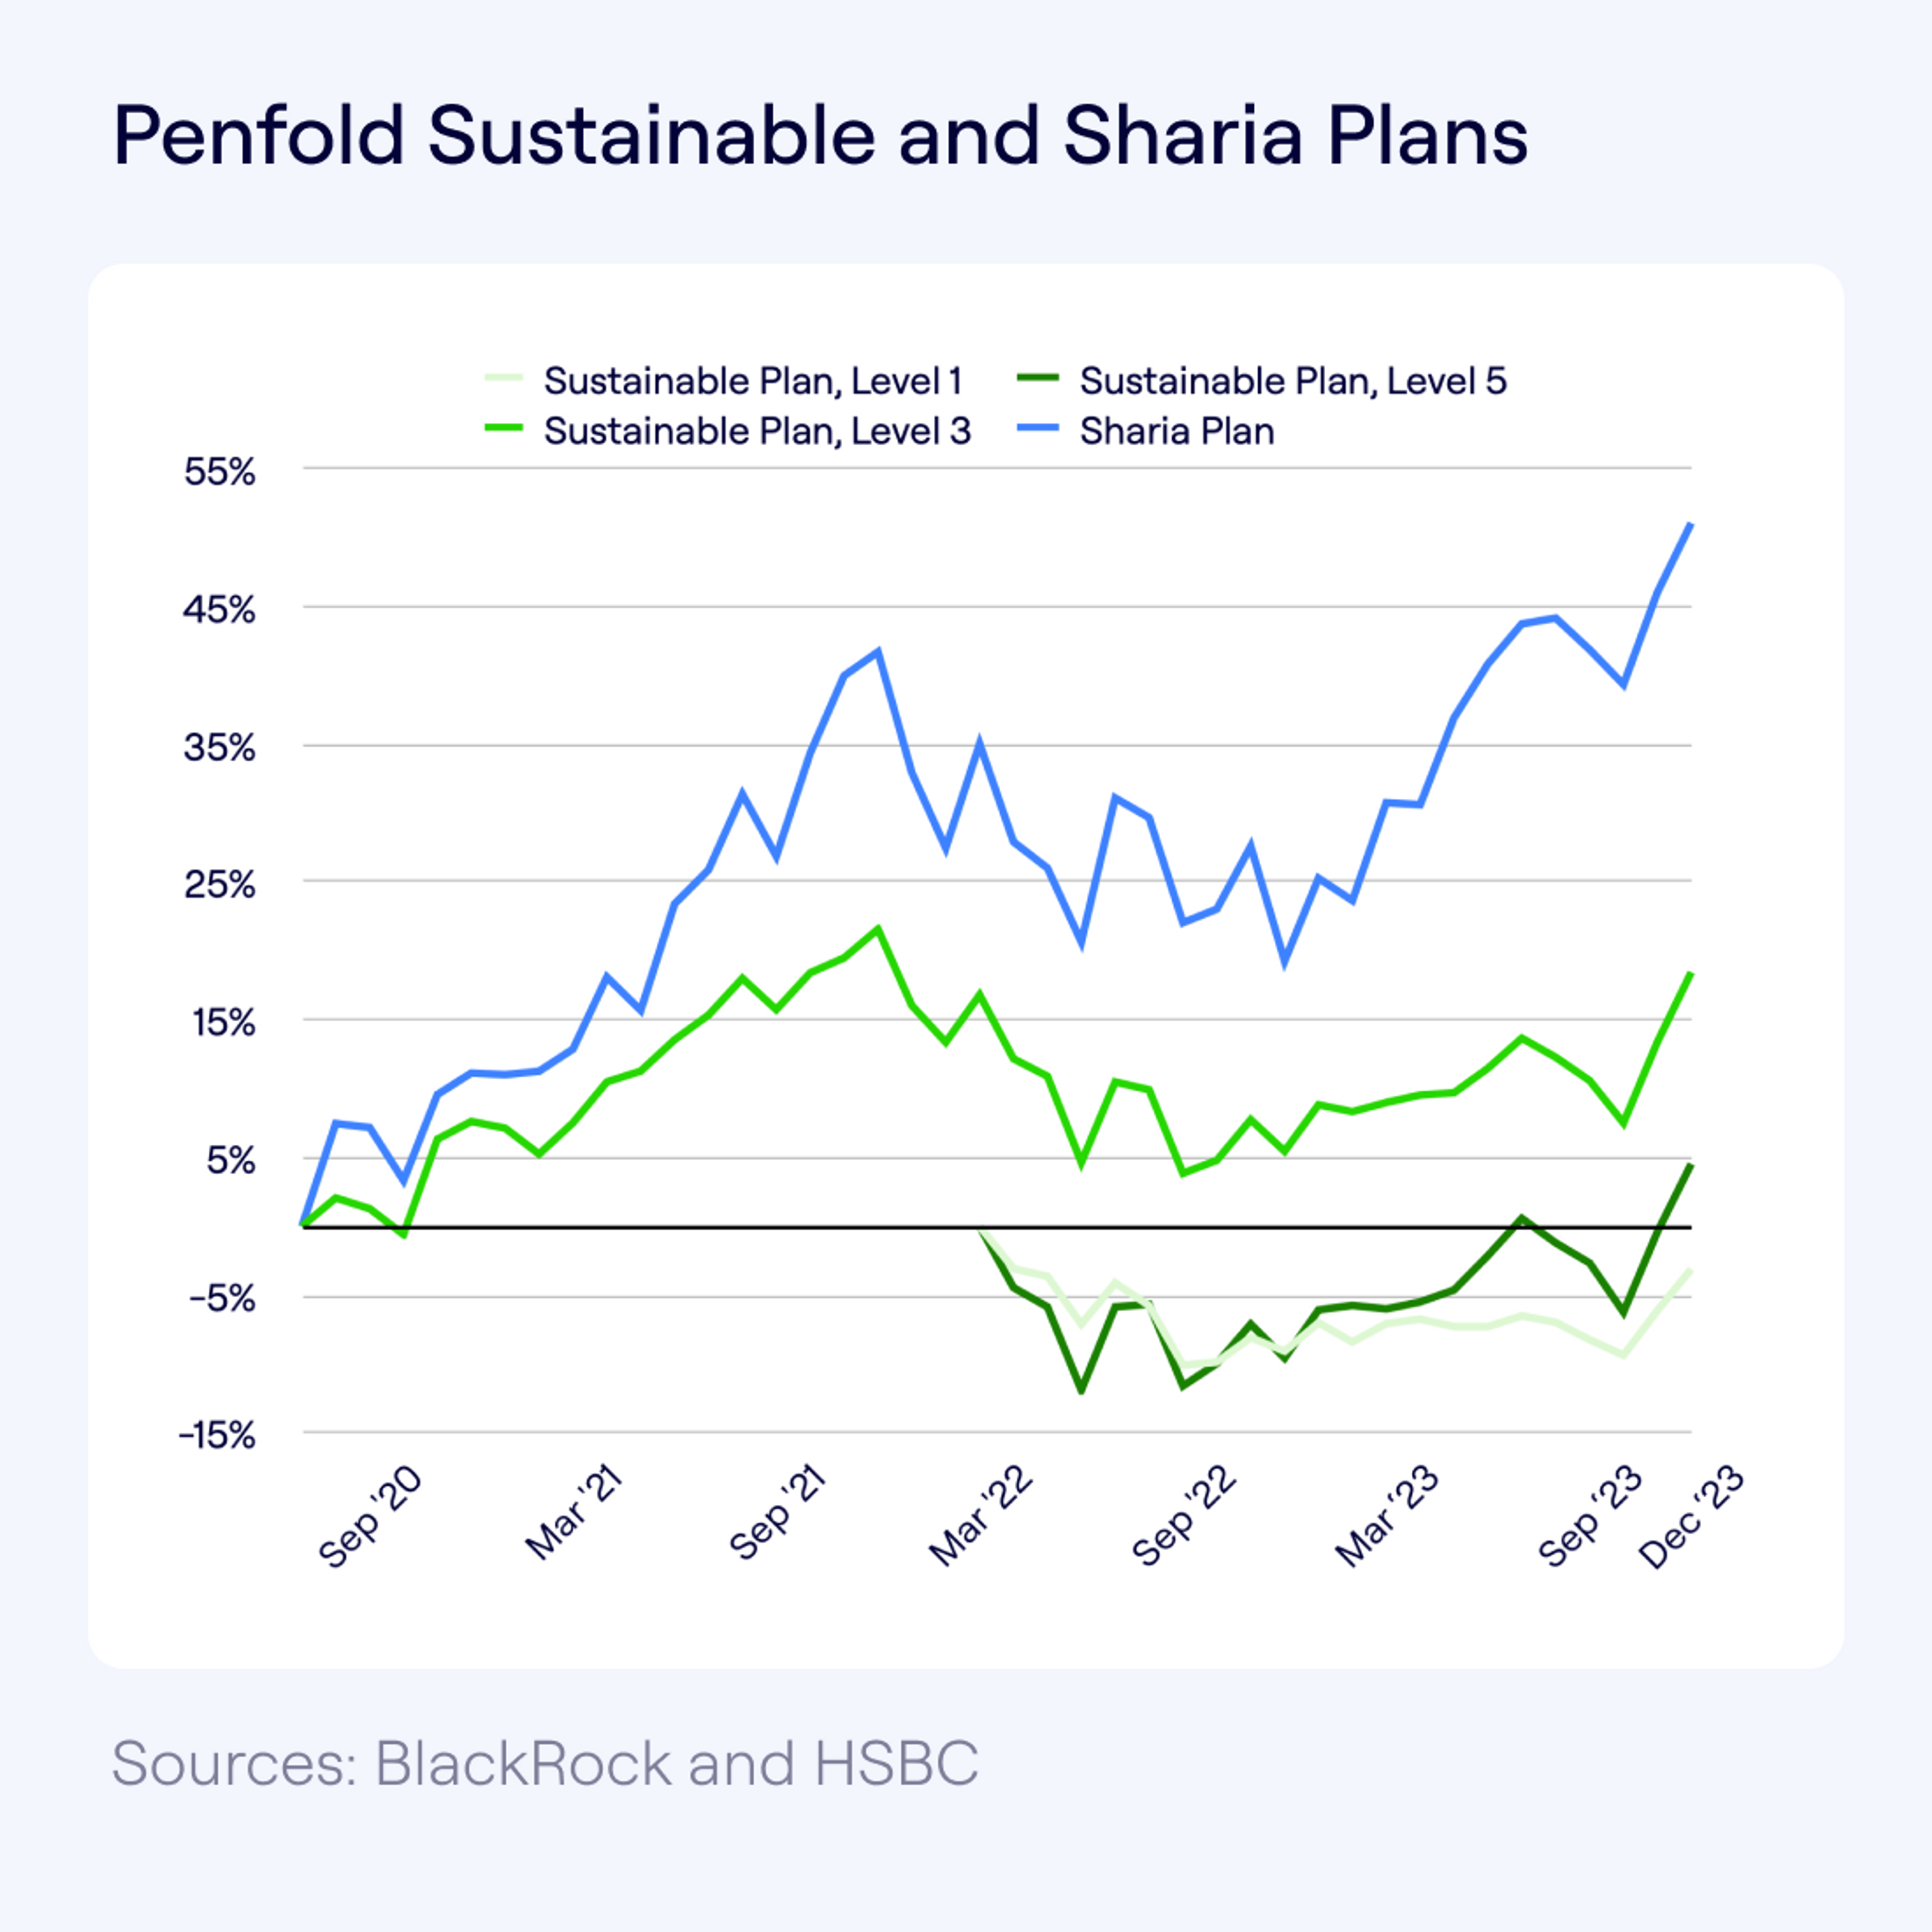 A multi-line graph titled "Penfold Sustainable and Sharia Plans," comparing the performance of different investment plans, including Sustainable Plan Levels 1, 3, 5, and a Sharia Plan from September 2020 to December 2023. The lines depict fluctuations with a general upward trend in recent months.